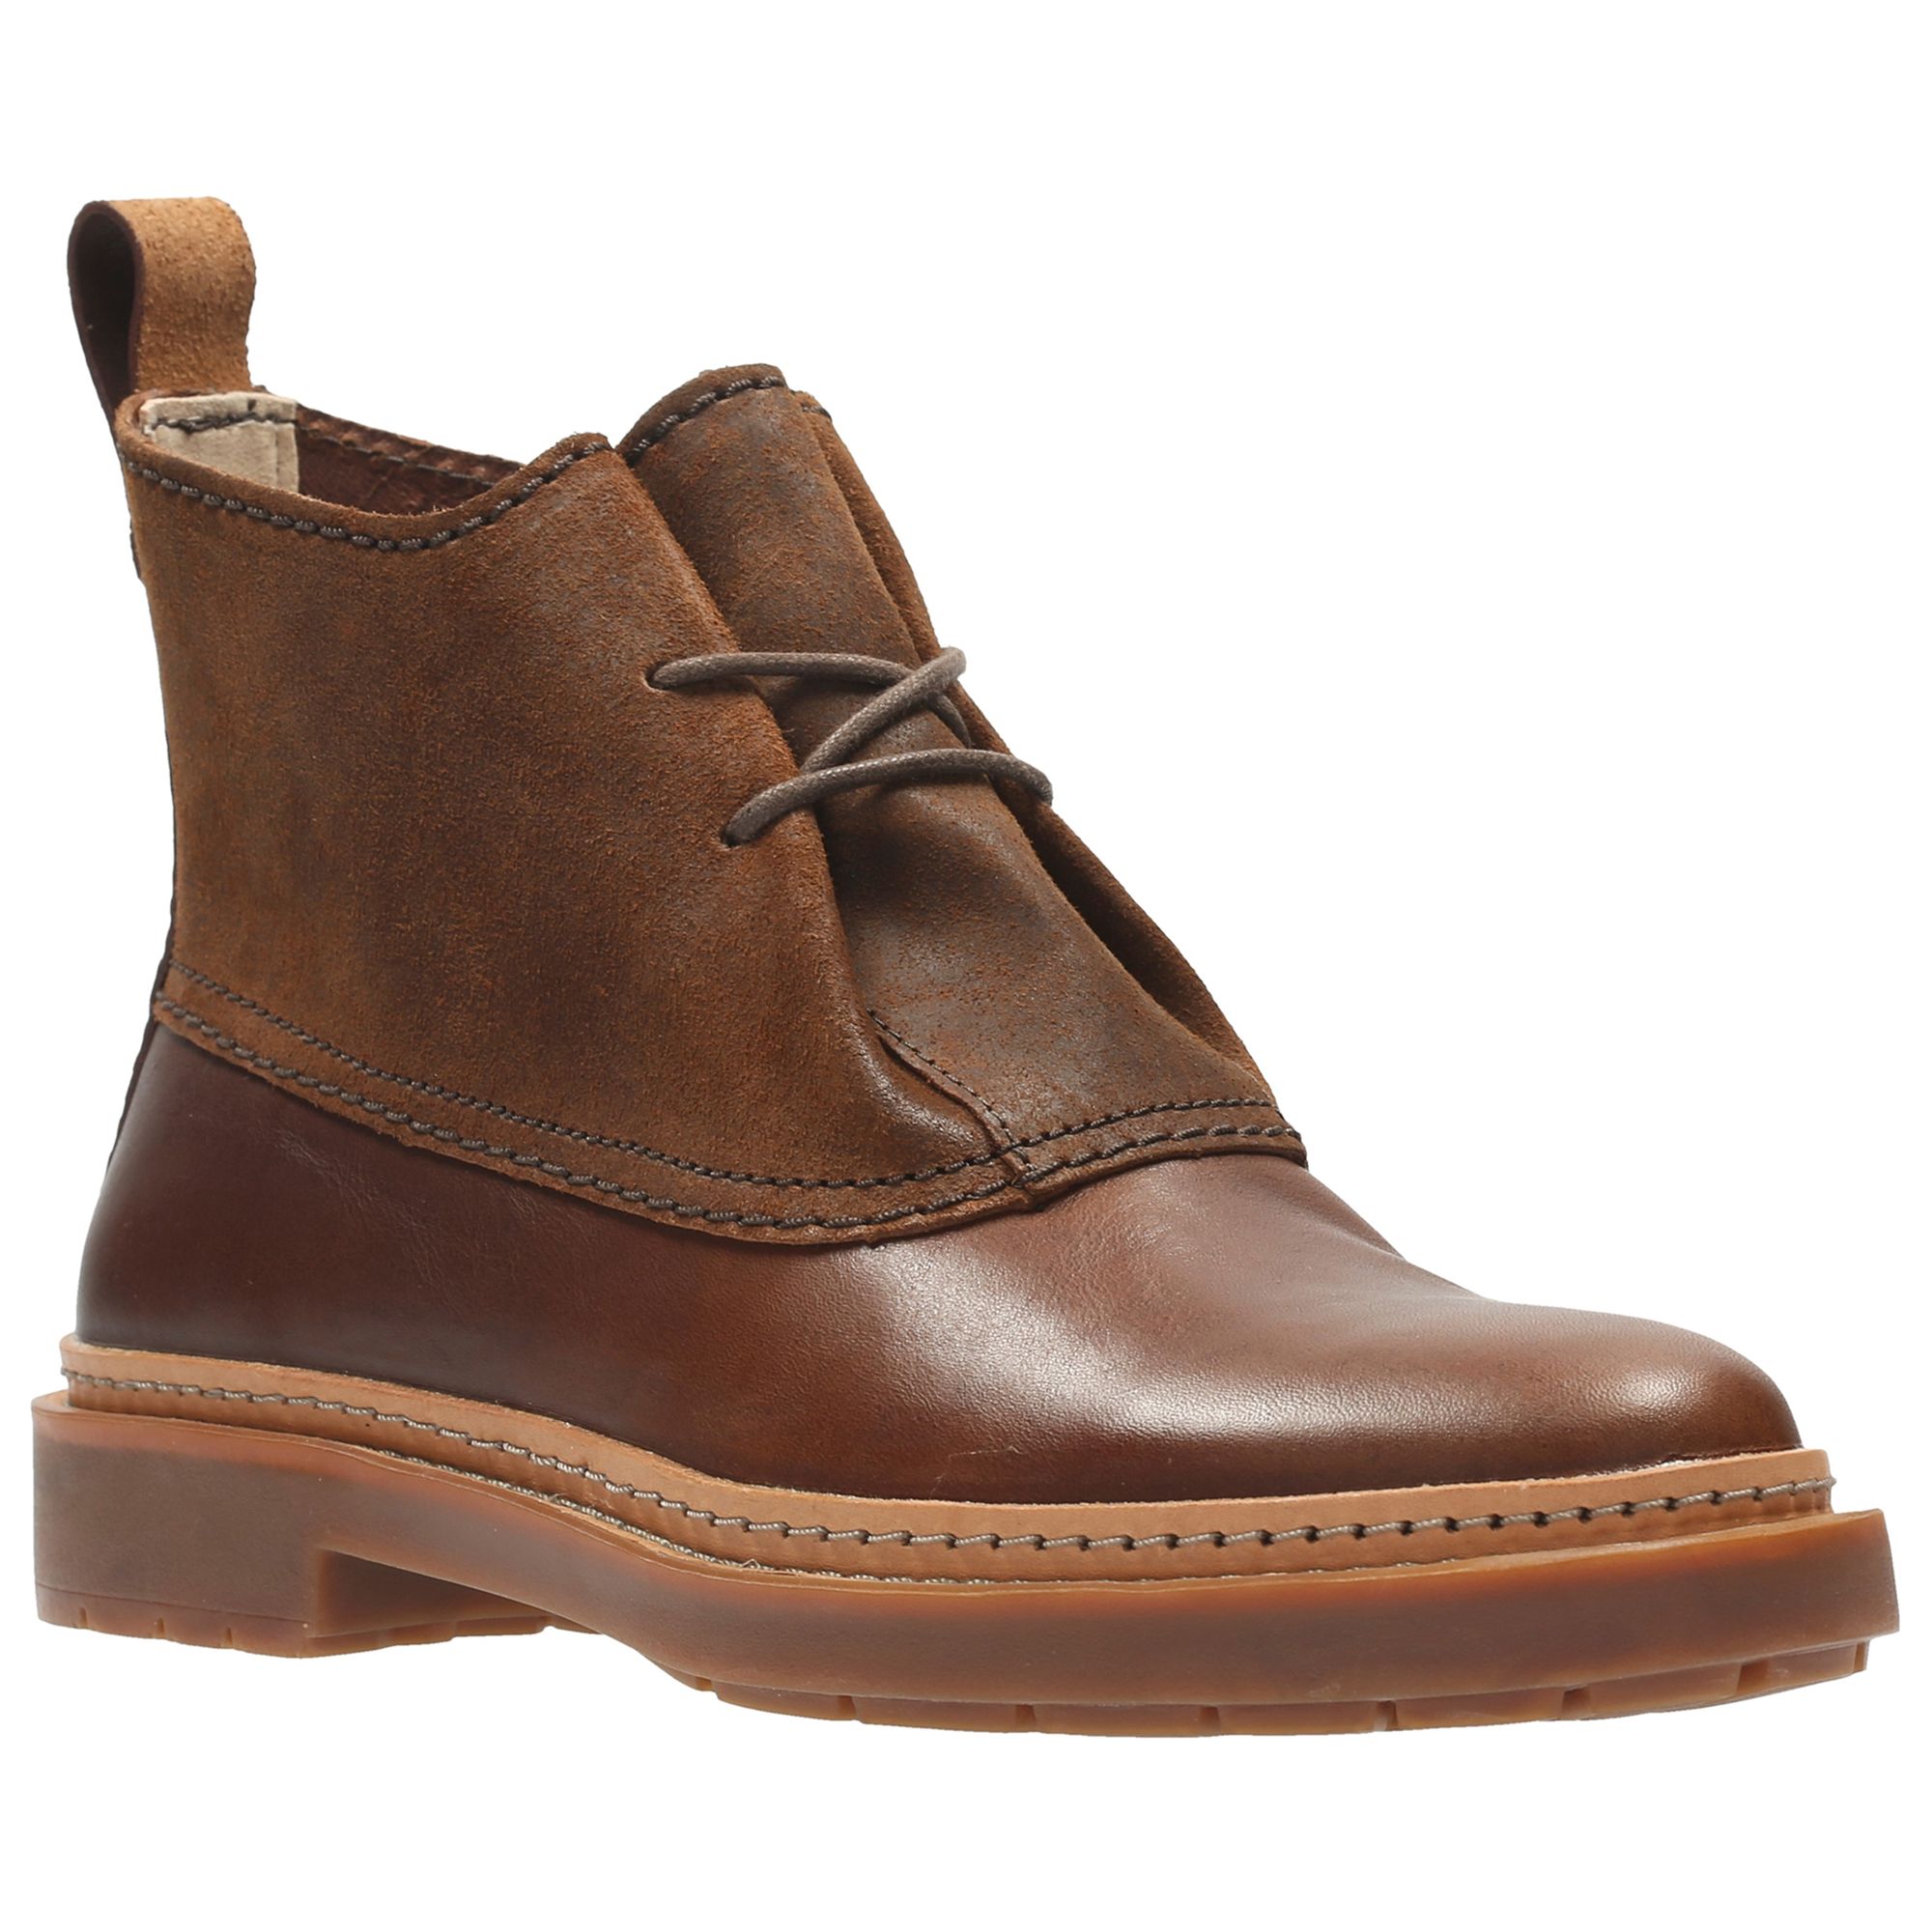 Clarks Trace Fawn Ankle Boots, Dark Tan 